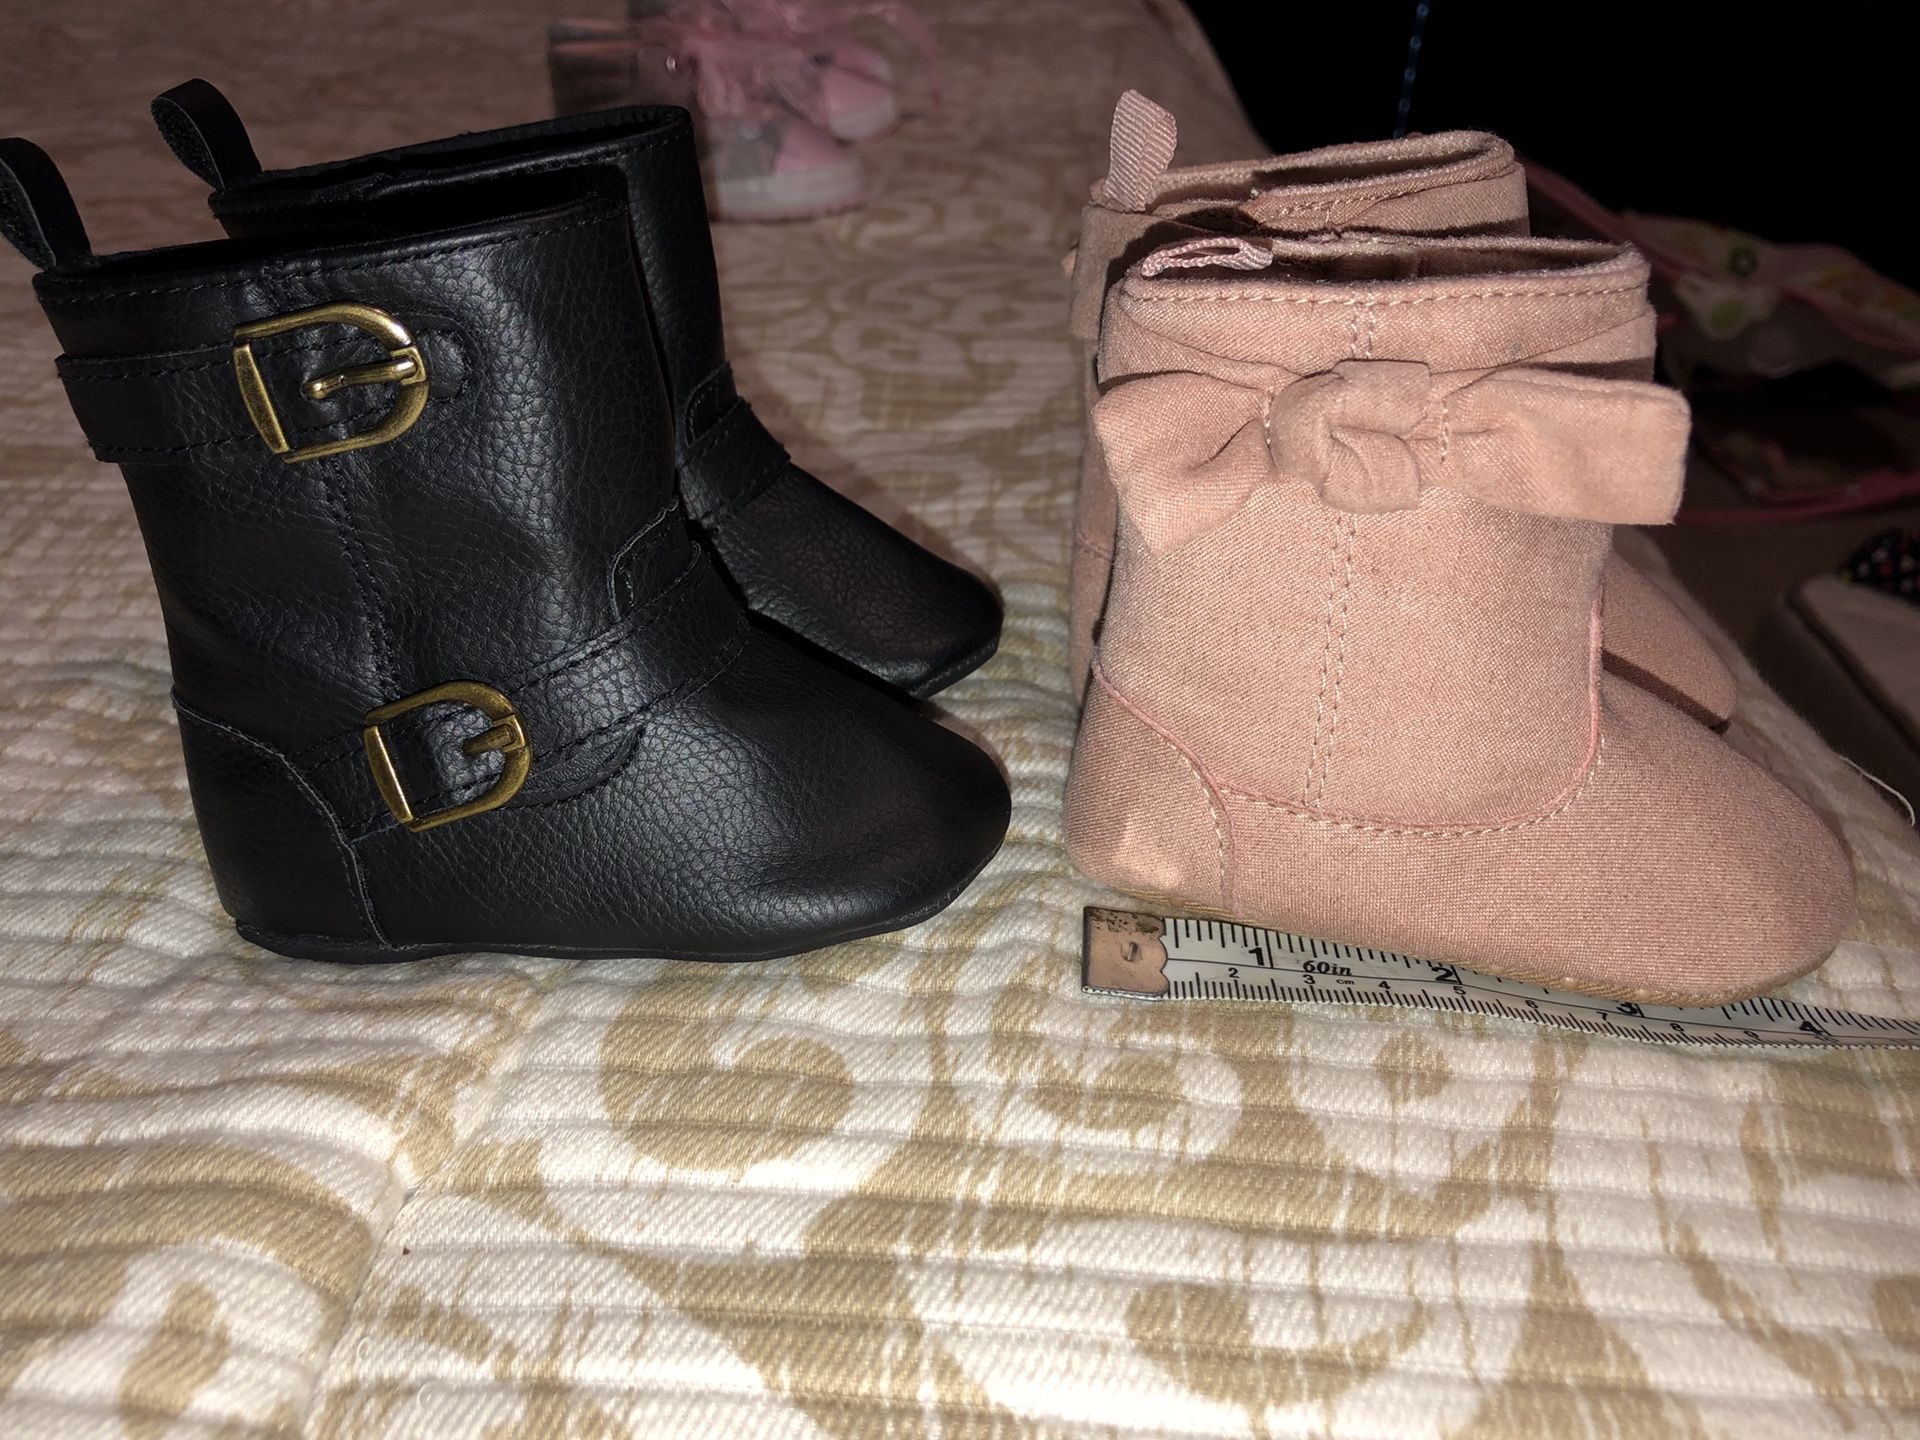 3-6 month baby girls boots/shoes